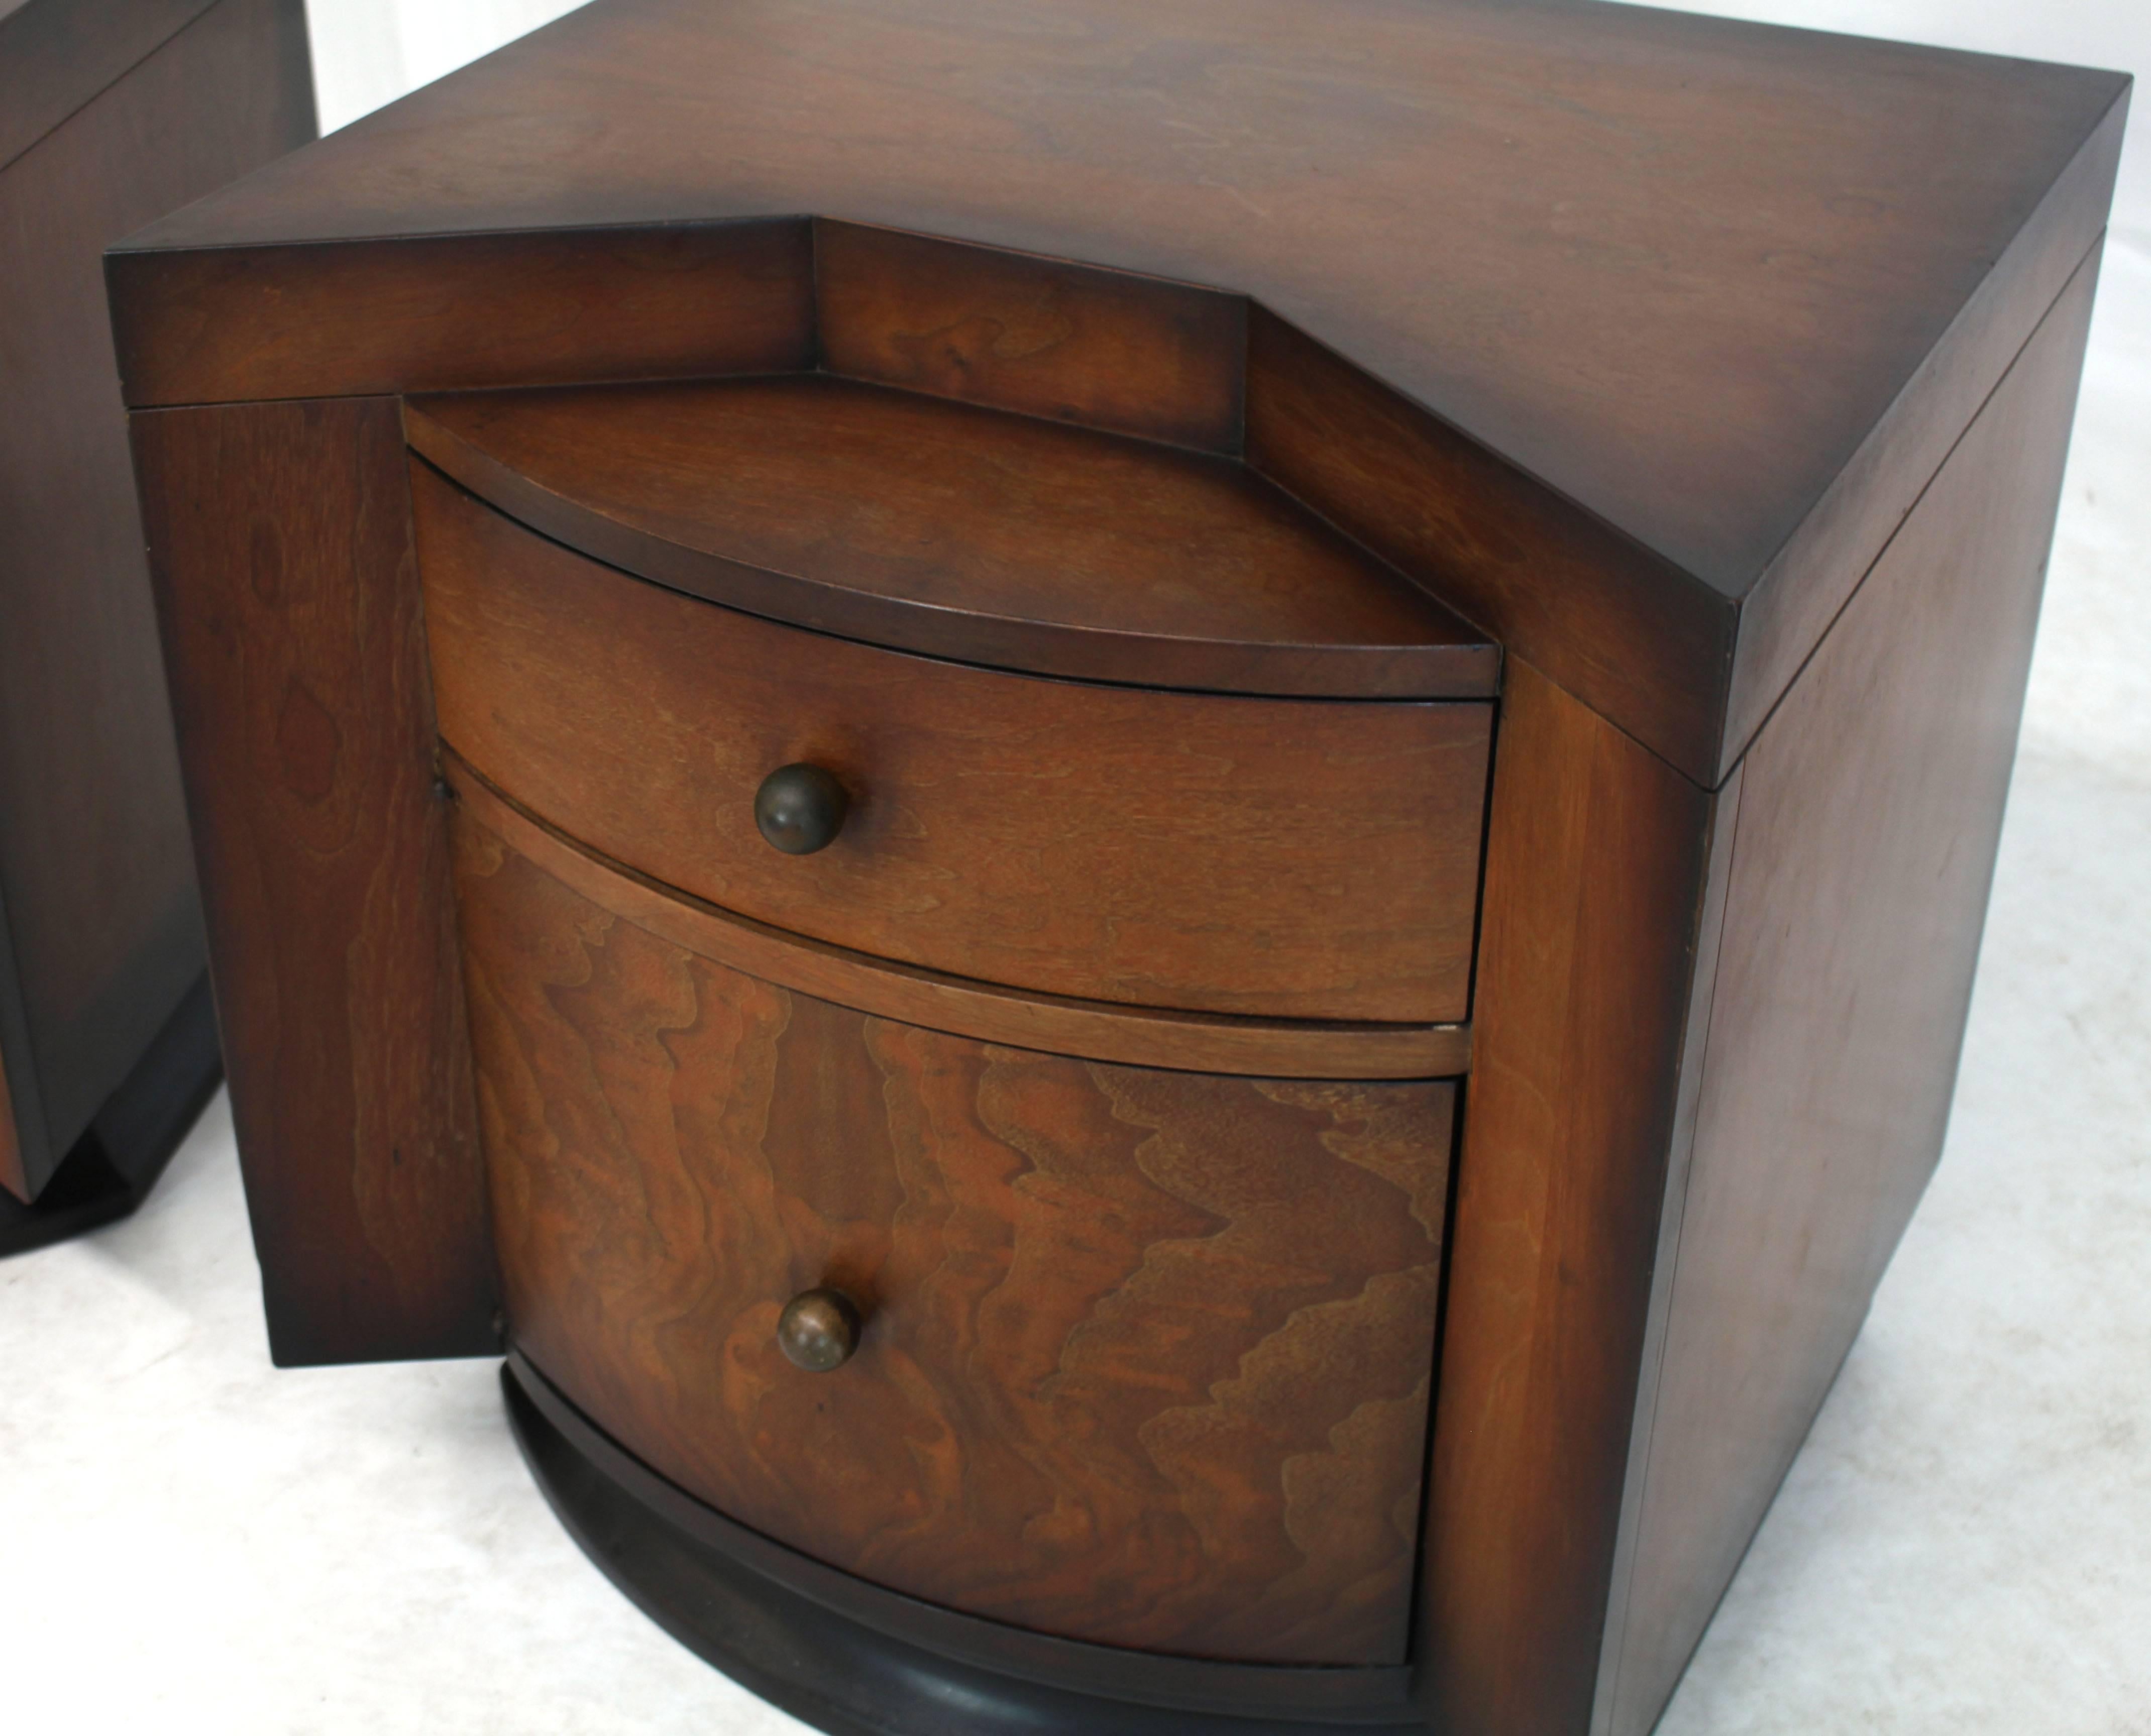 Very nice walnut full bodied Mid-Century Modern design end tables with solid brass balls pulls.